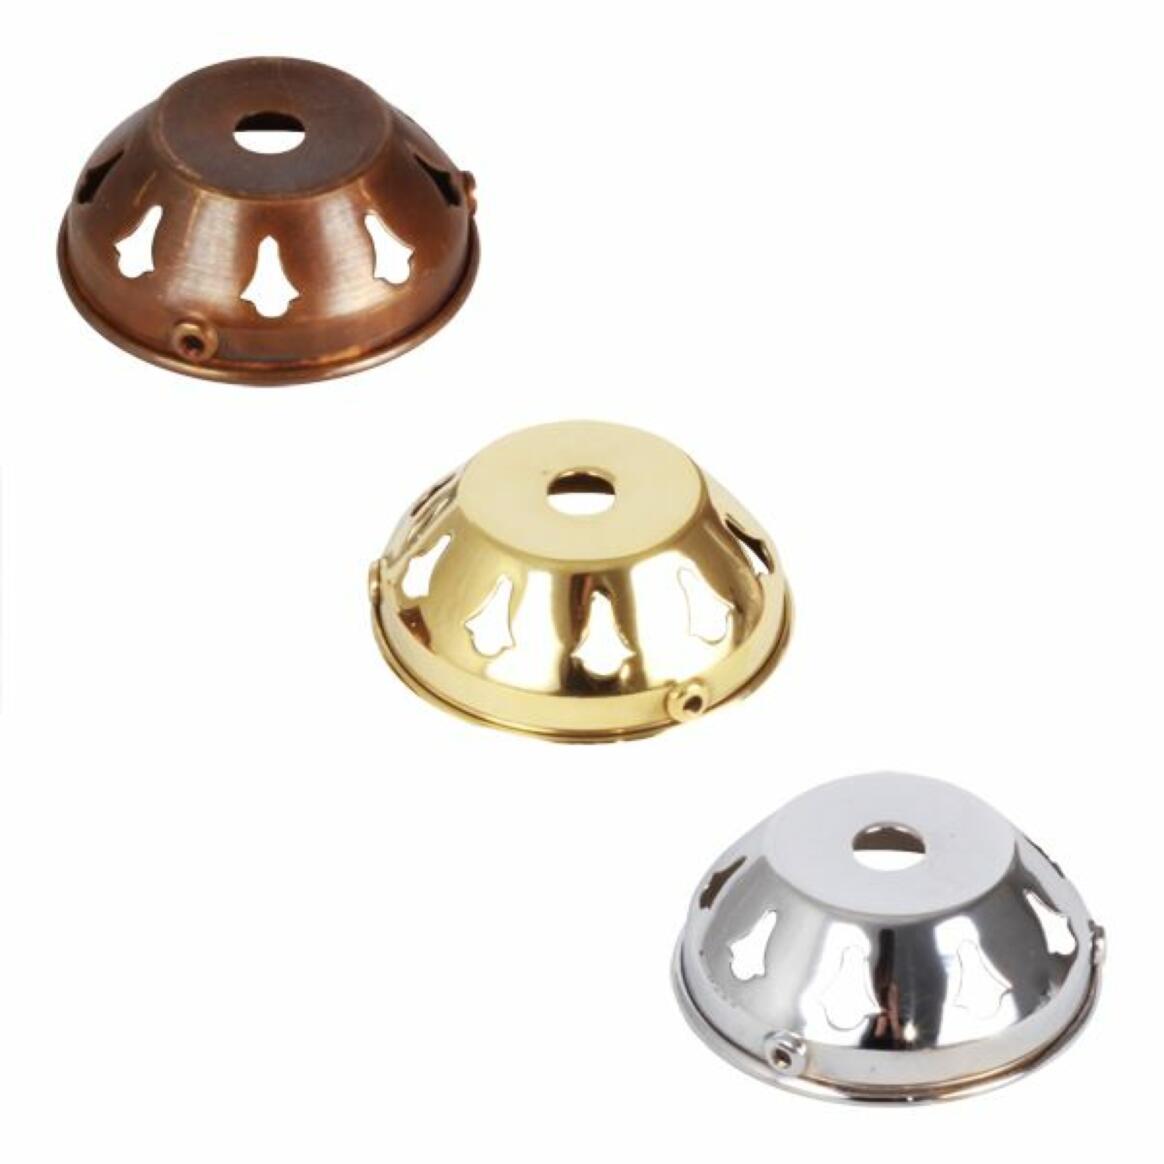 6cm chrome gallery for light fitting main product image